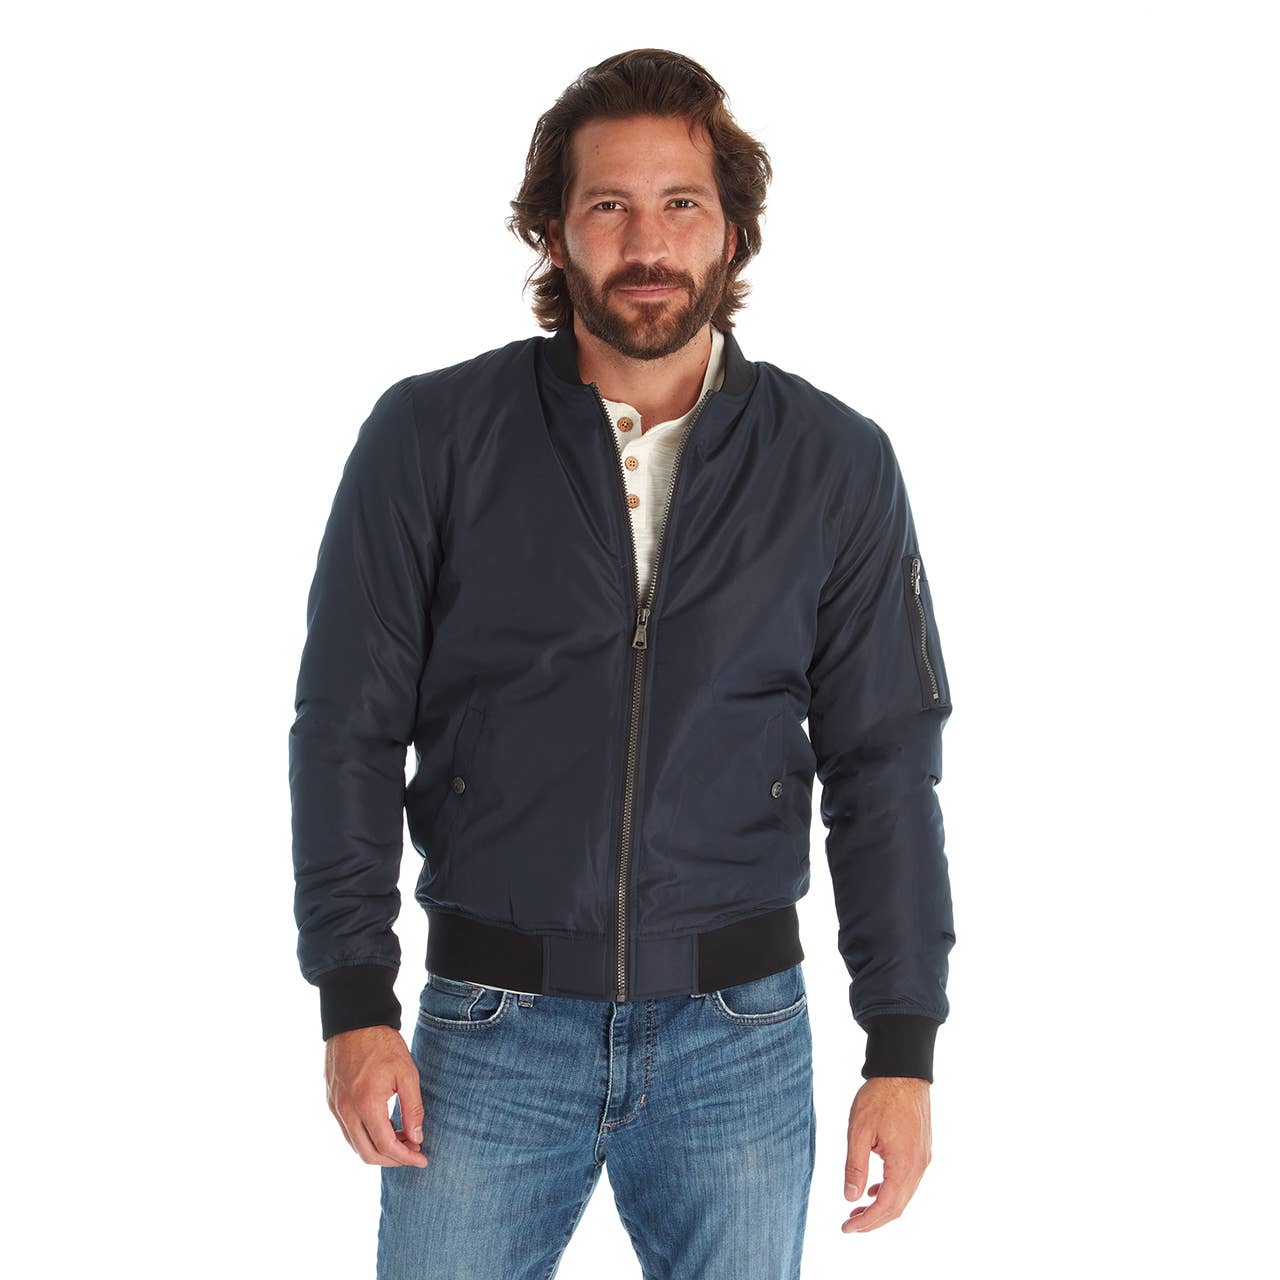 Men's Jacket Trends for Fall and Winter 2022